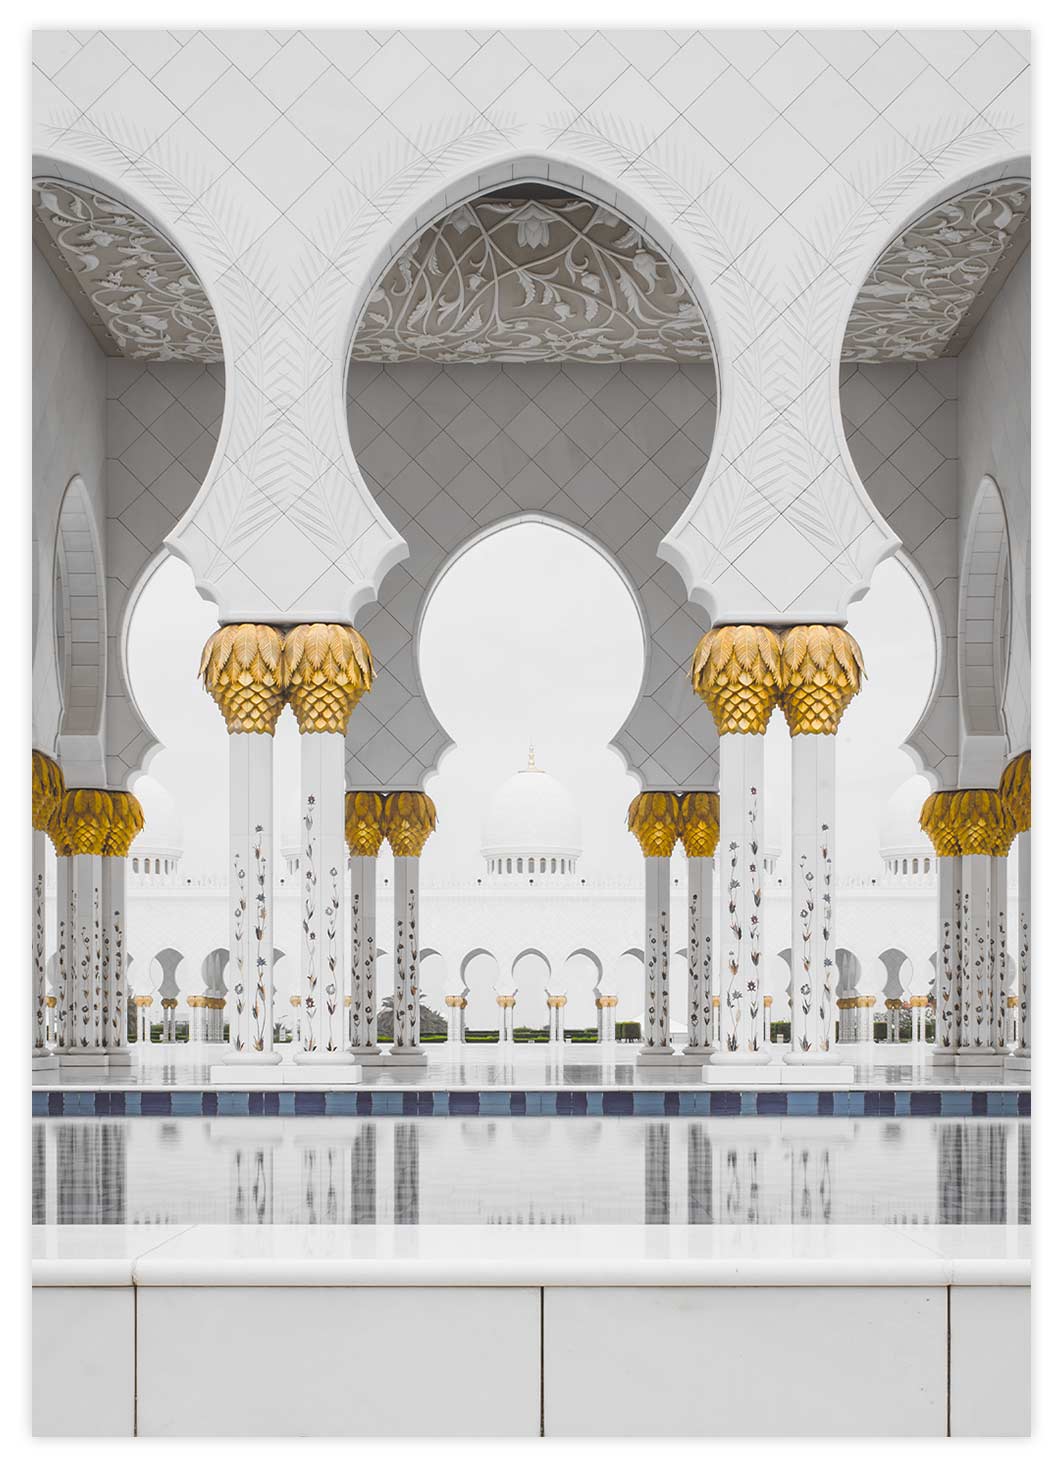 Moschee in Abu Dhabi Poster